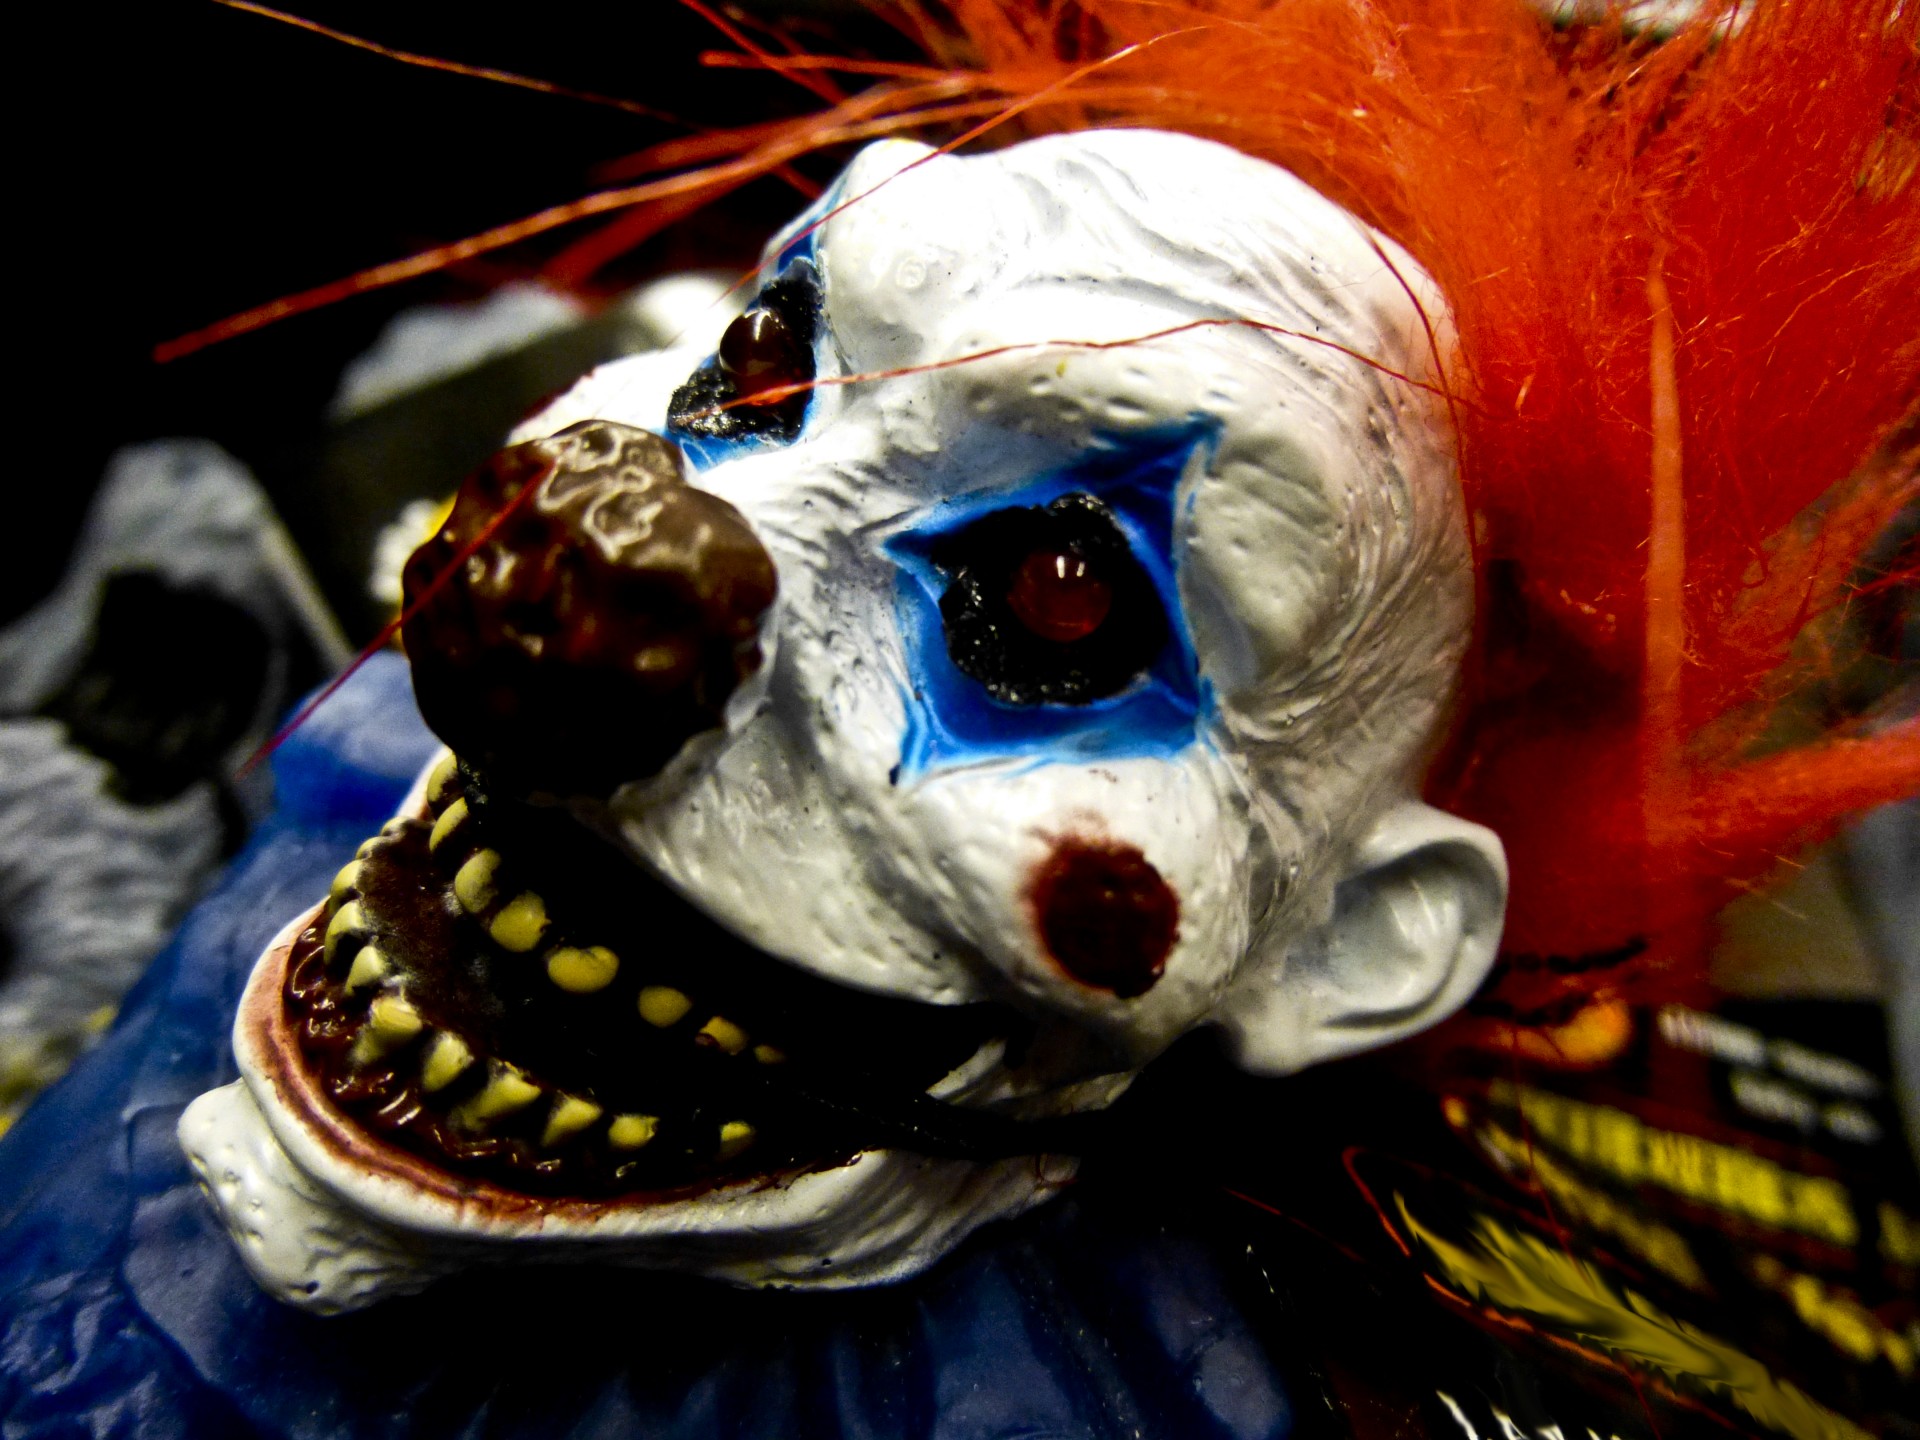 Some retailers in the US have begun pulling 'scary' clown masks from the shelves. (Image: publicdomainpictures.com)